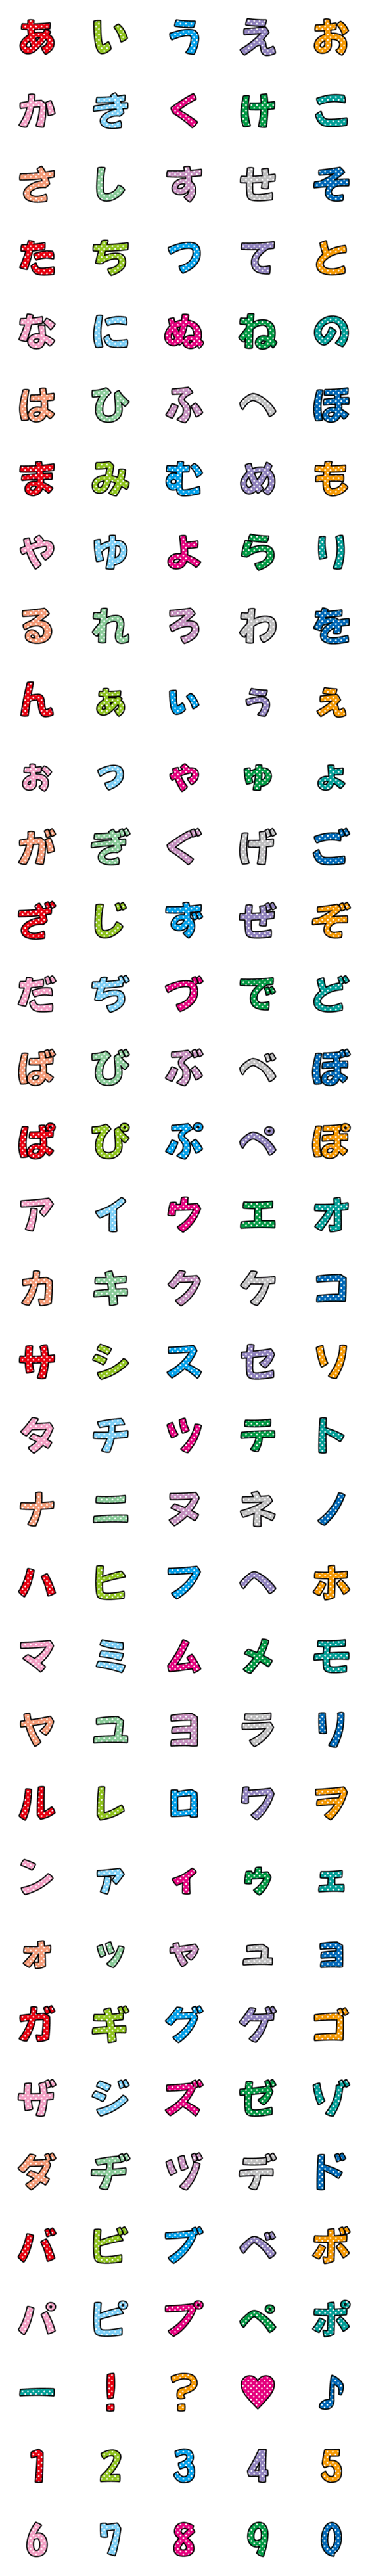 [LINE絵文字]aall-カラフル水玉デコ文字-かなカナの画像一覧